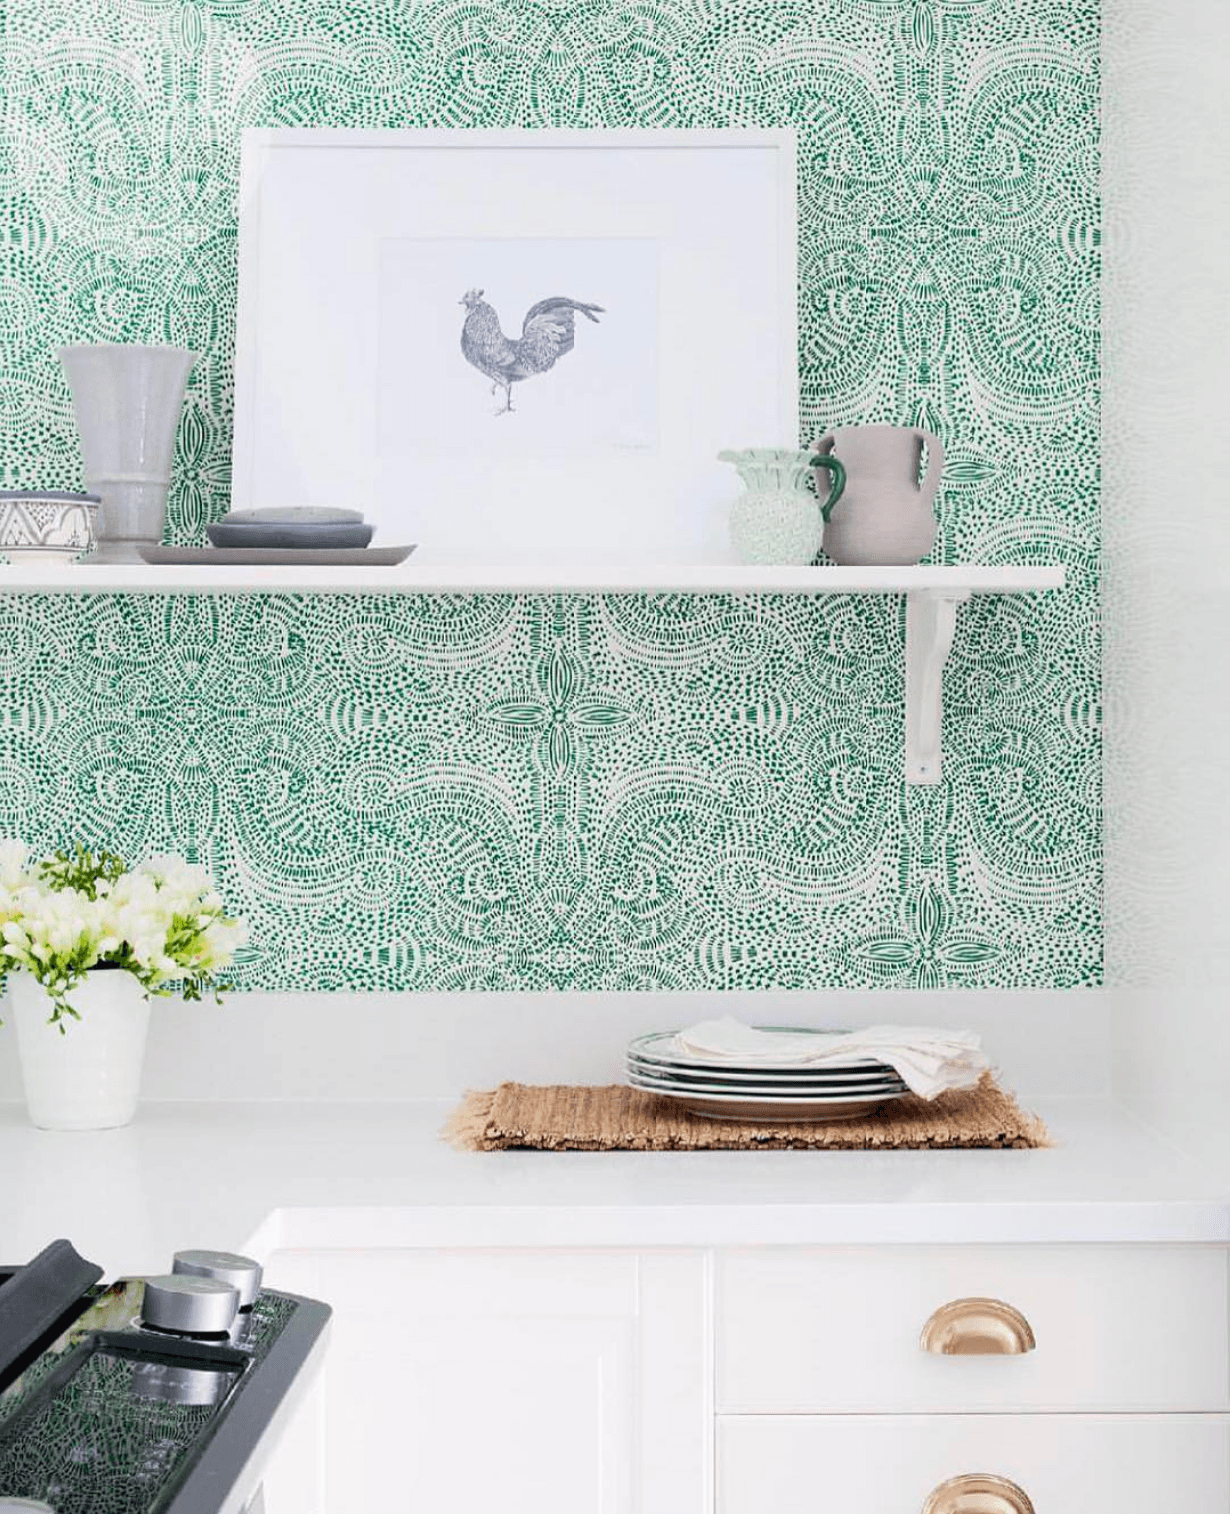 Our Favorite Patterns for the Kitchen | Andanza Green wallpaper | Laundry Studio | Hygge & West